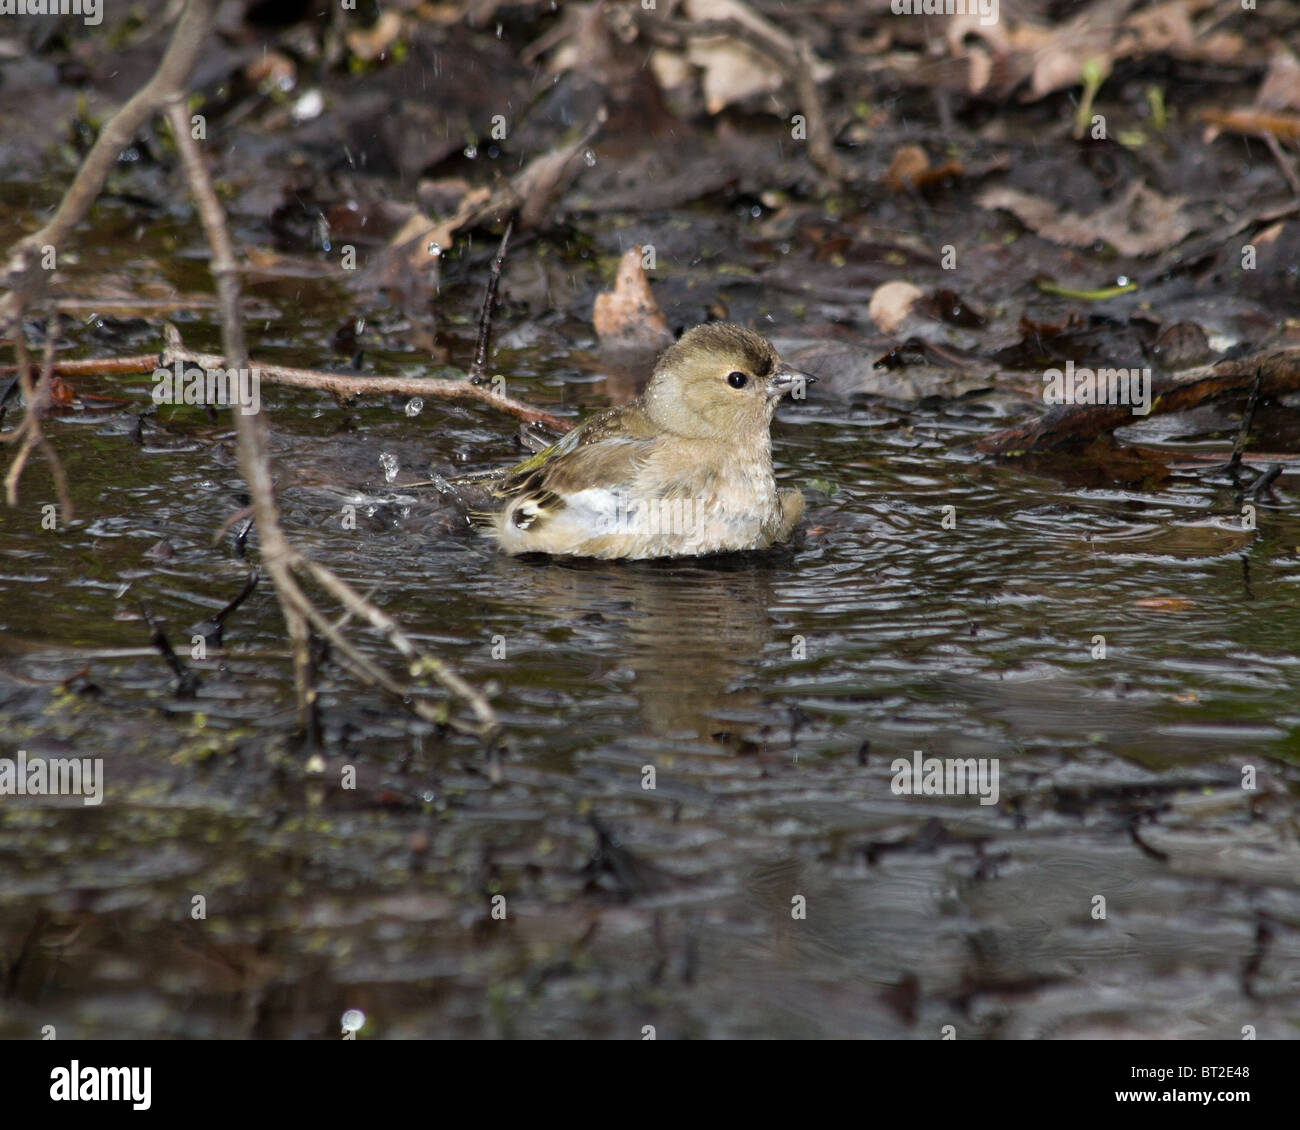 The Common Chaffinch (Fringilla coelebs) is in the wild nature. Stock Photo